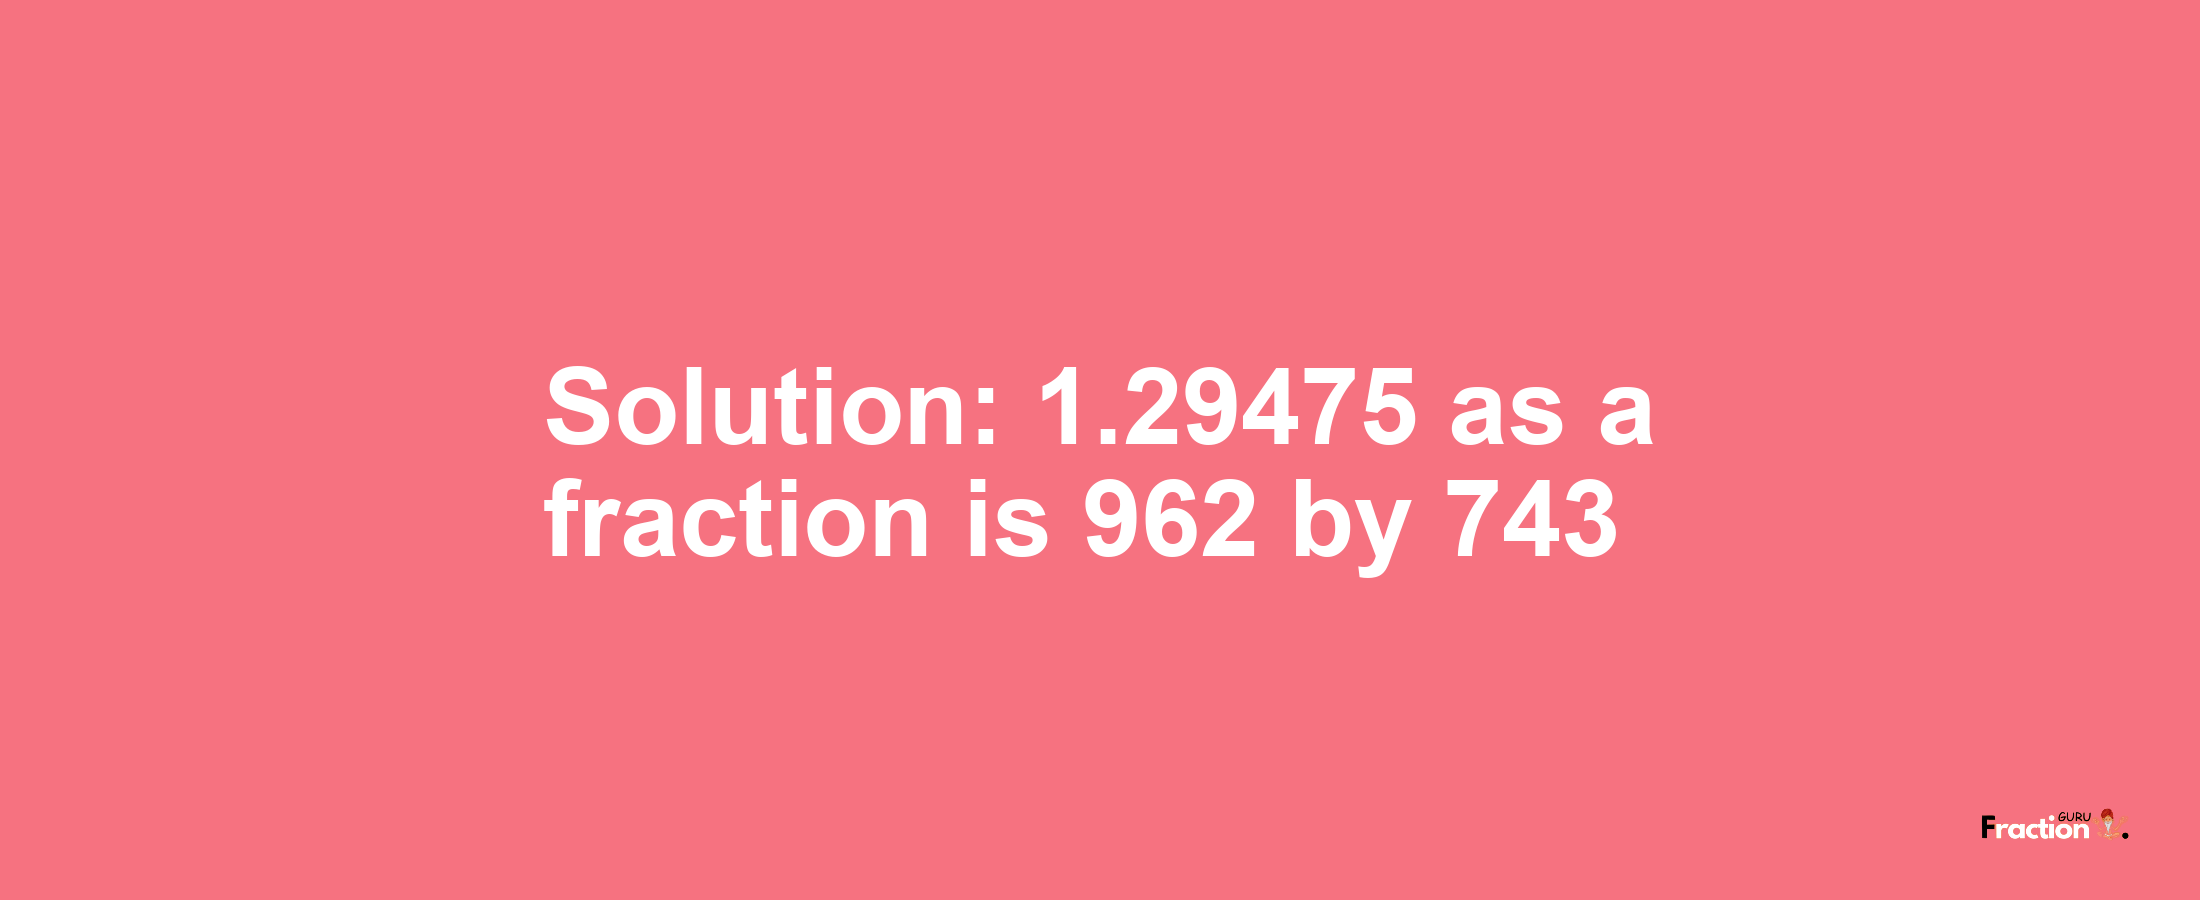 Solution:1.29475 as a fraction is 962/743